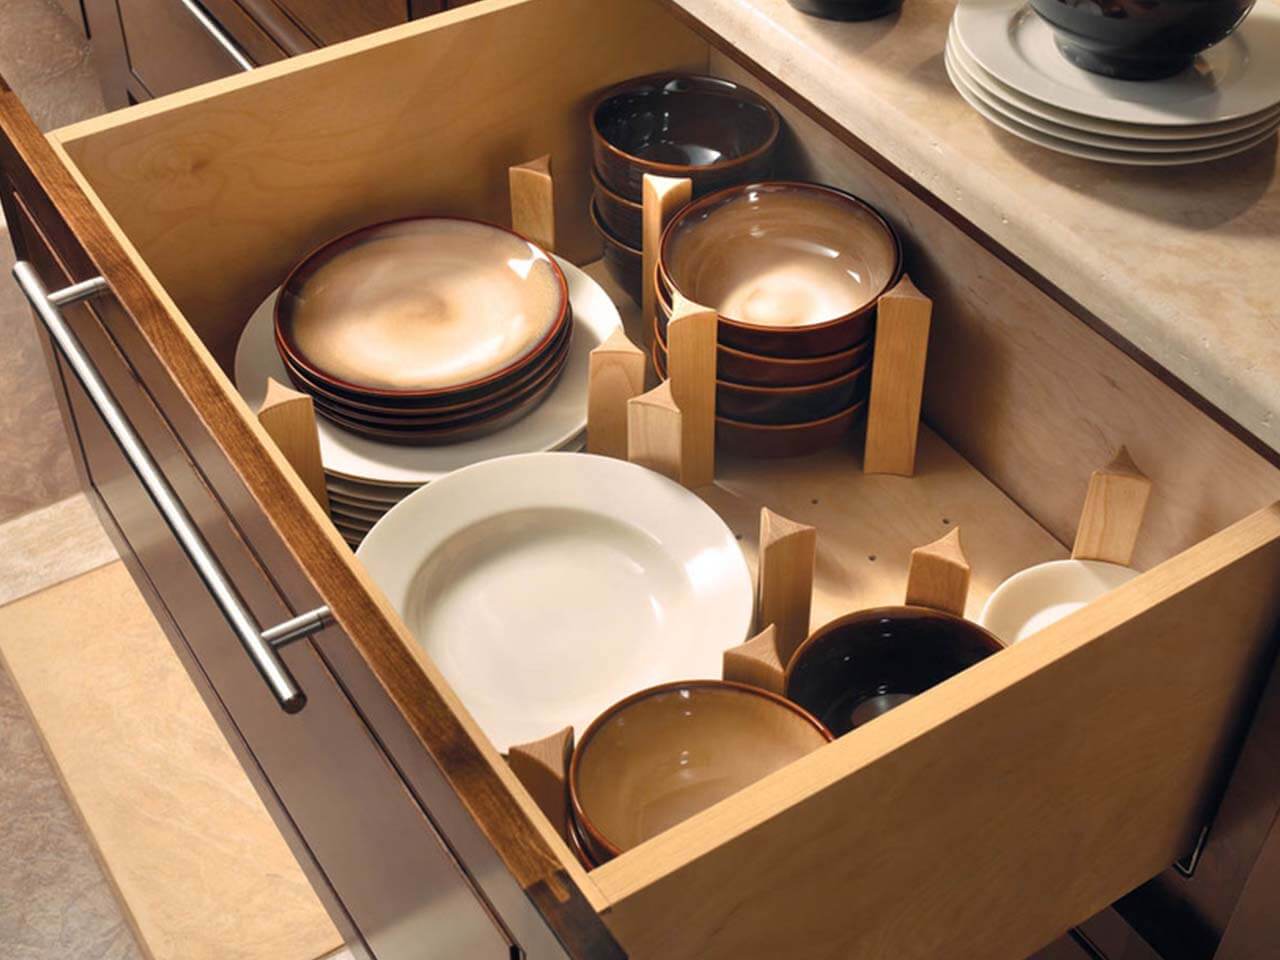 kitchen cabinet built in storage options for dishes